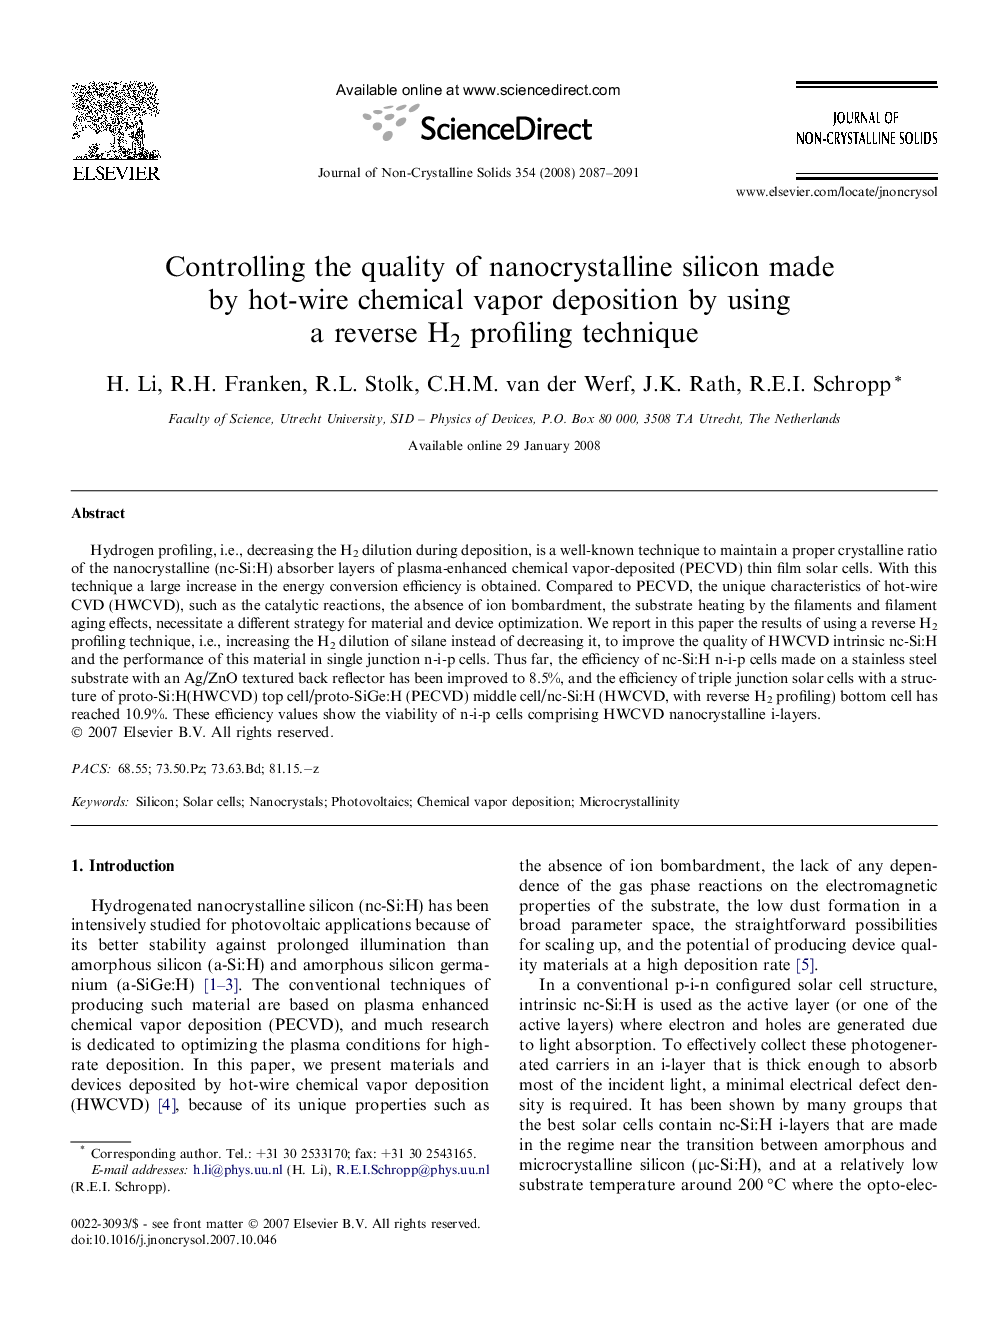 Controlling the quality of nanocrystalline silicon made by hot-wire chemical vapor deposition by using a reverse H2 profiling technique